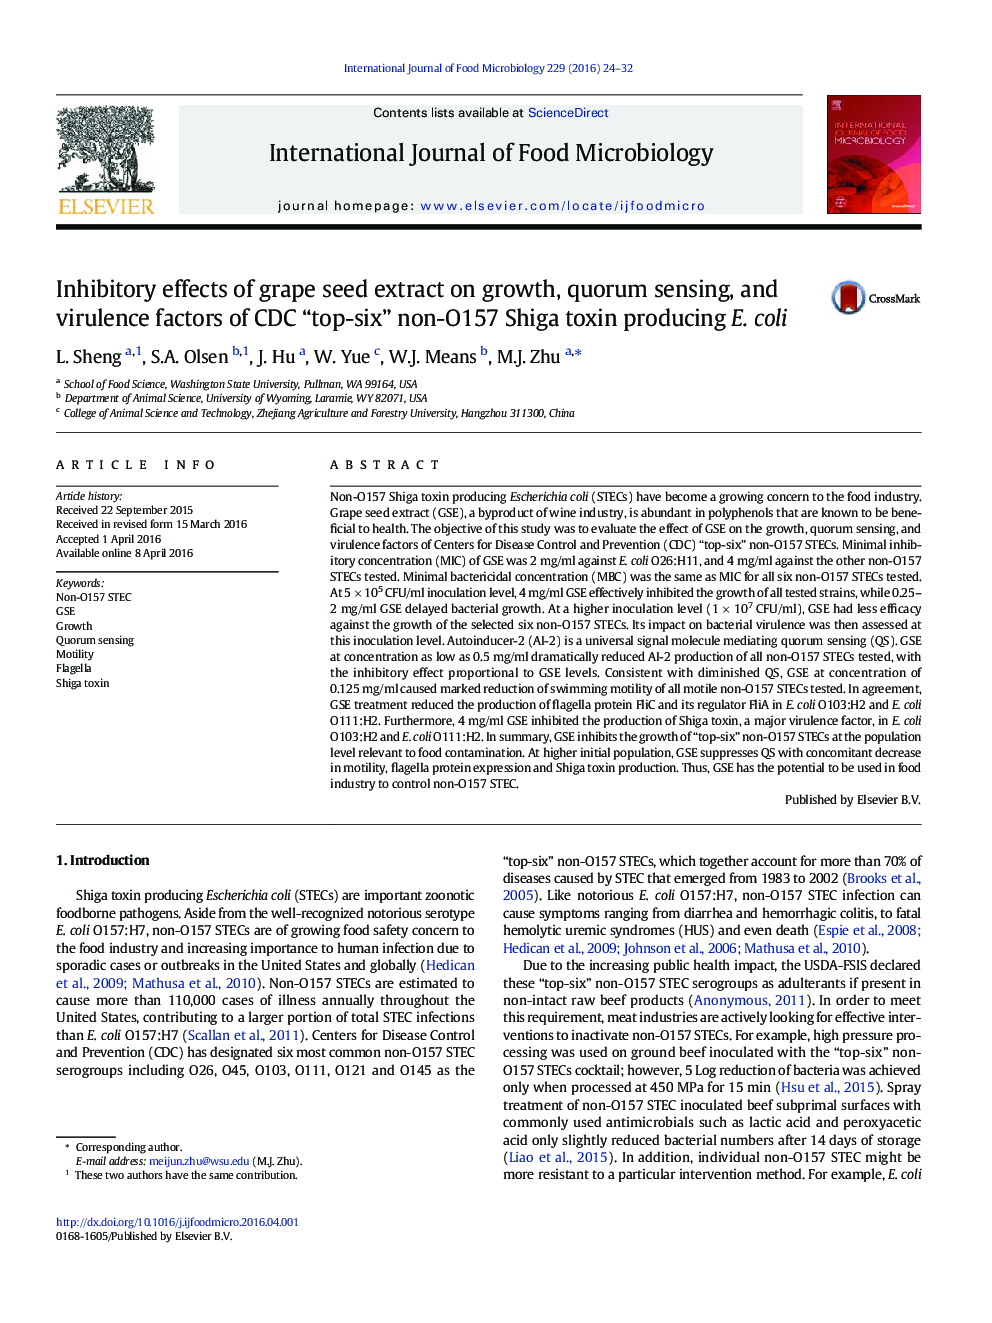 Inhibitory effects of grape seed extract on growth, quorum sensing, and virulence factors of CDC “top-six” non-O157 Shiga toxin producing E. coli